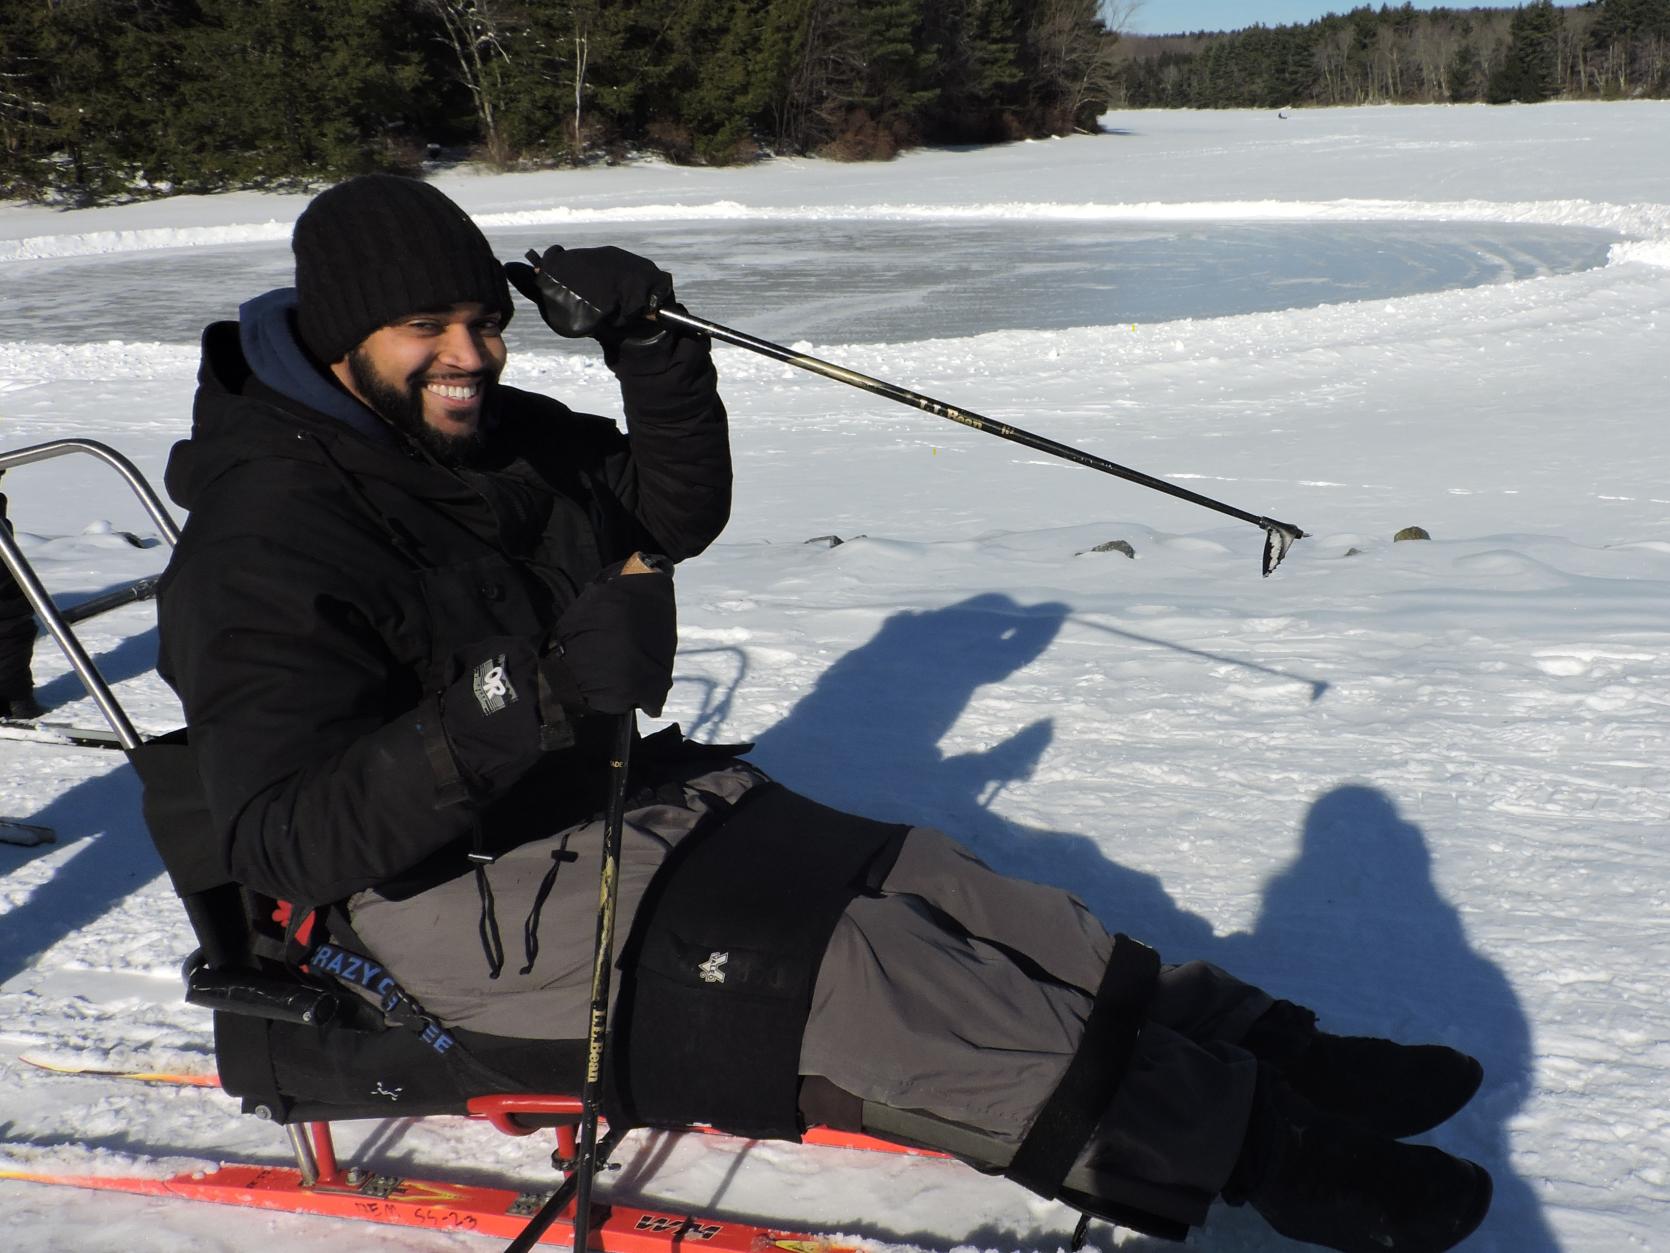 A smiling sit-skier in the snow next to a frozen lake.